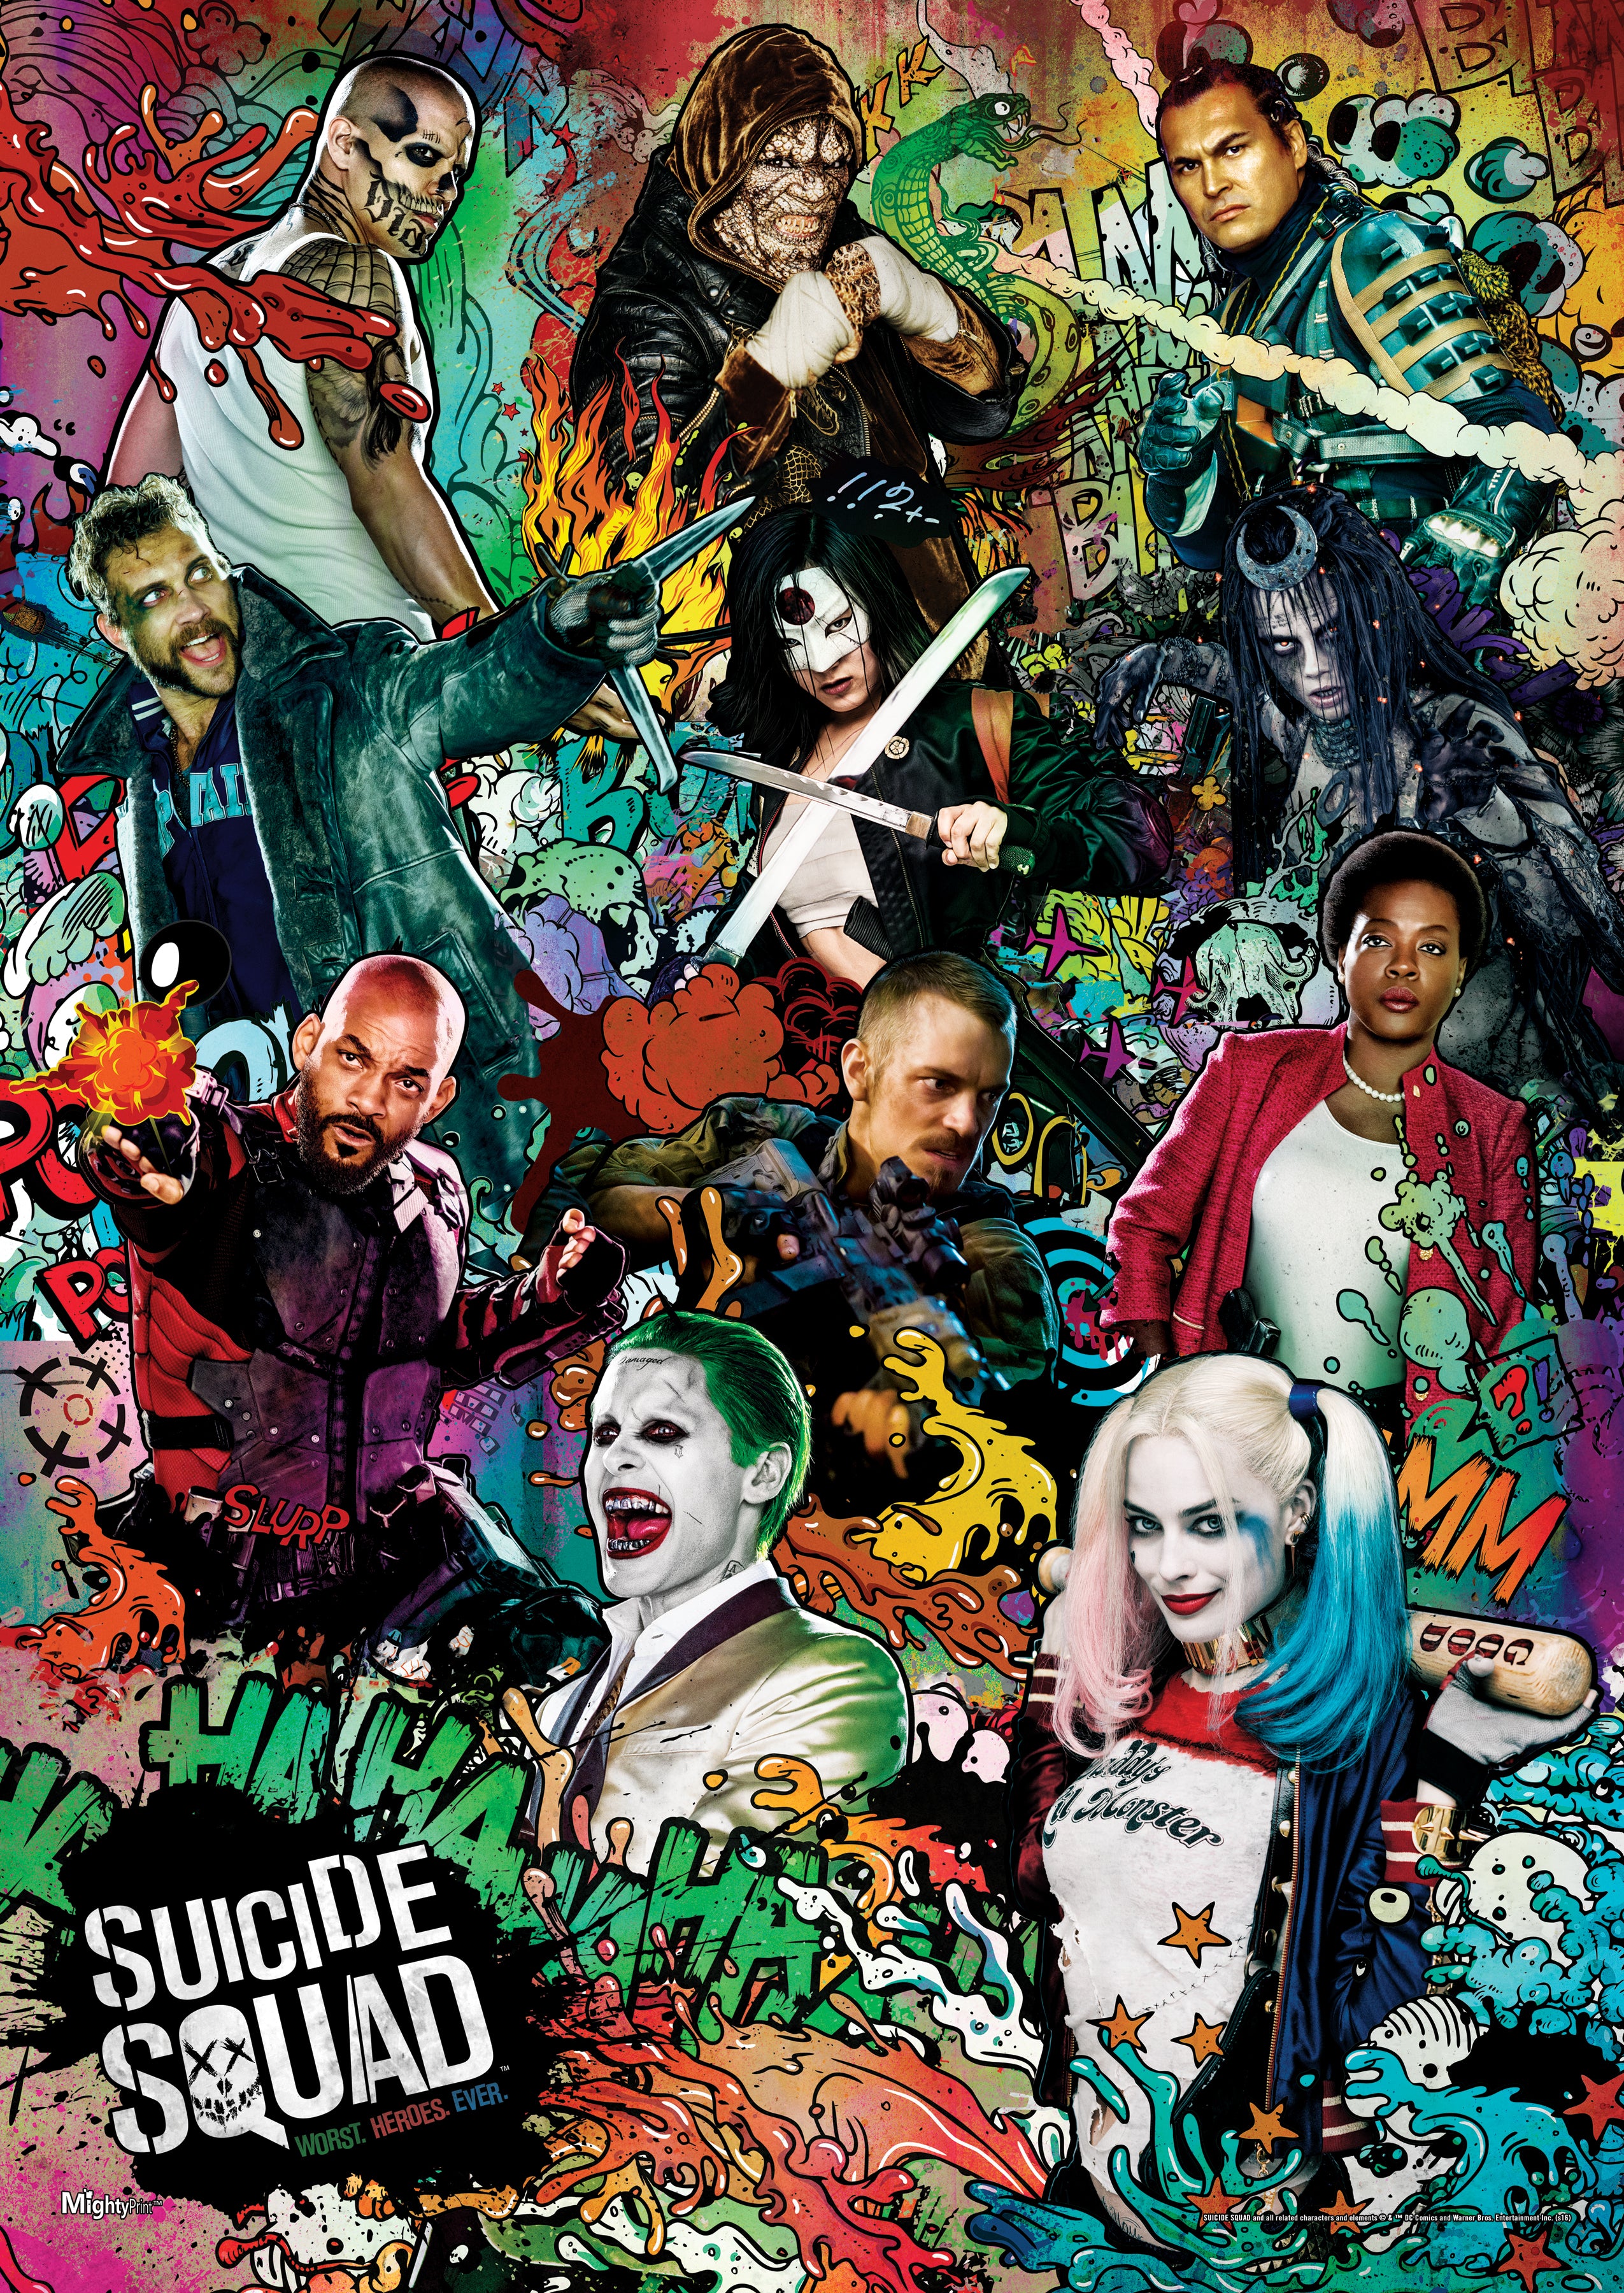 Suicide Squad (We Are Bad Guys) MightyPrint™ Wall Art MP17240270